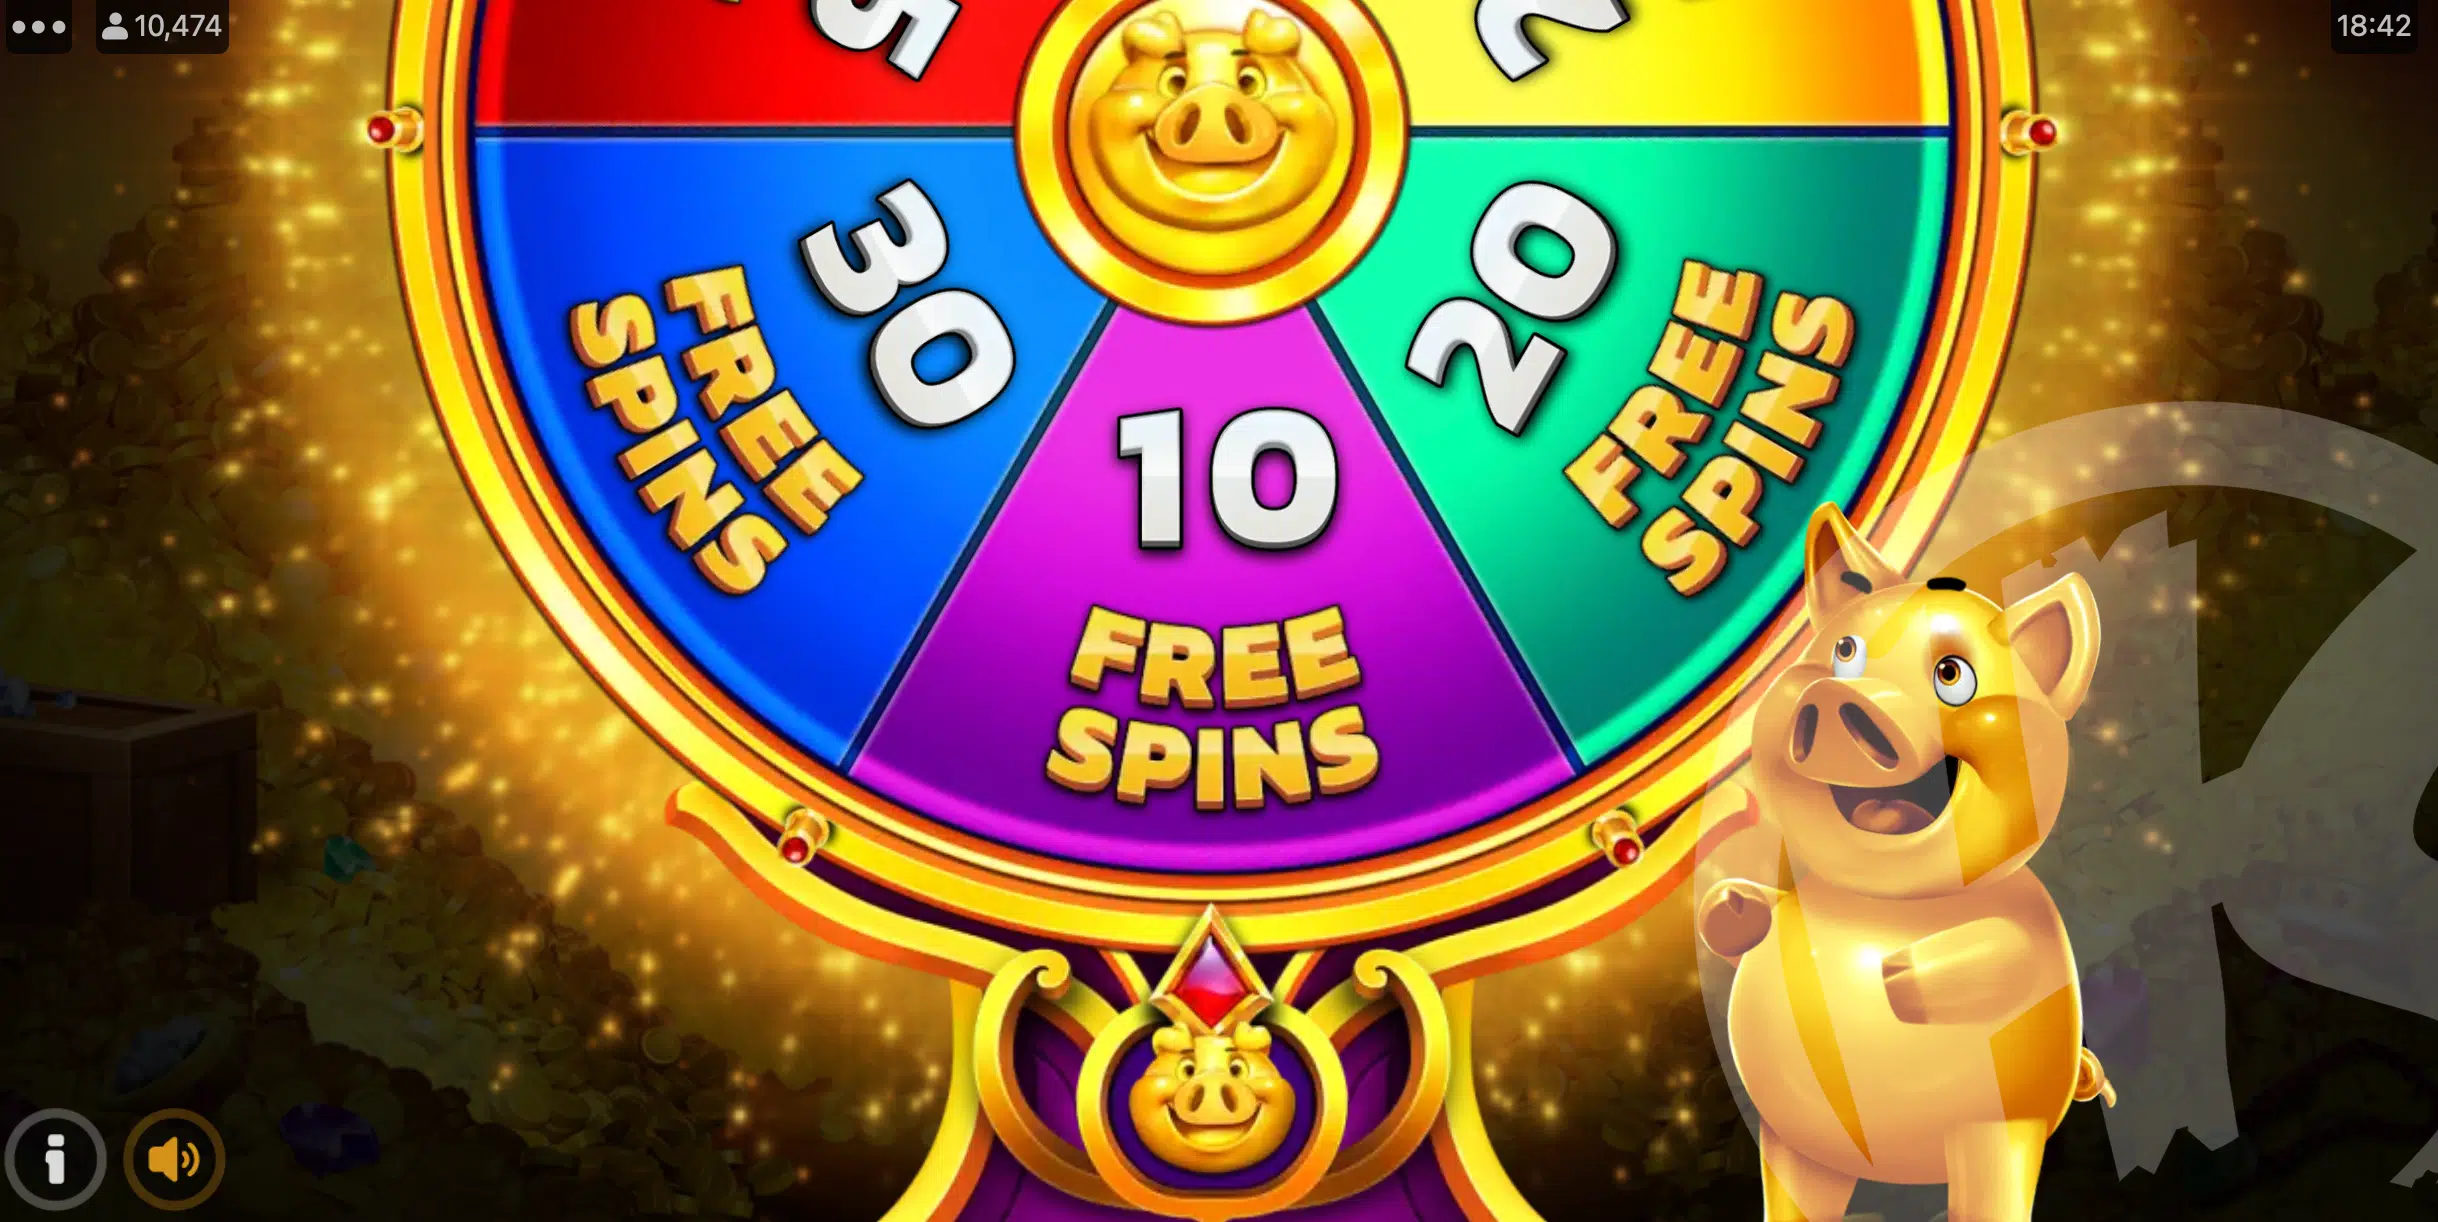 Spin the Free Spins Wheel to Trigger up to 30 Free Spins